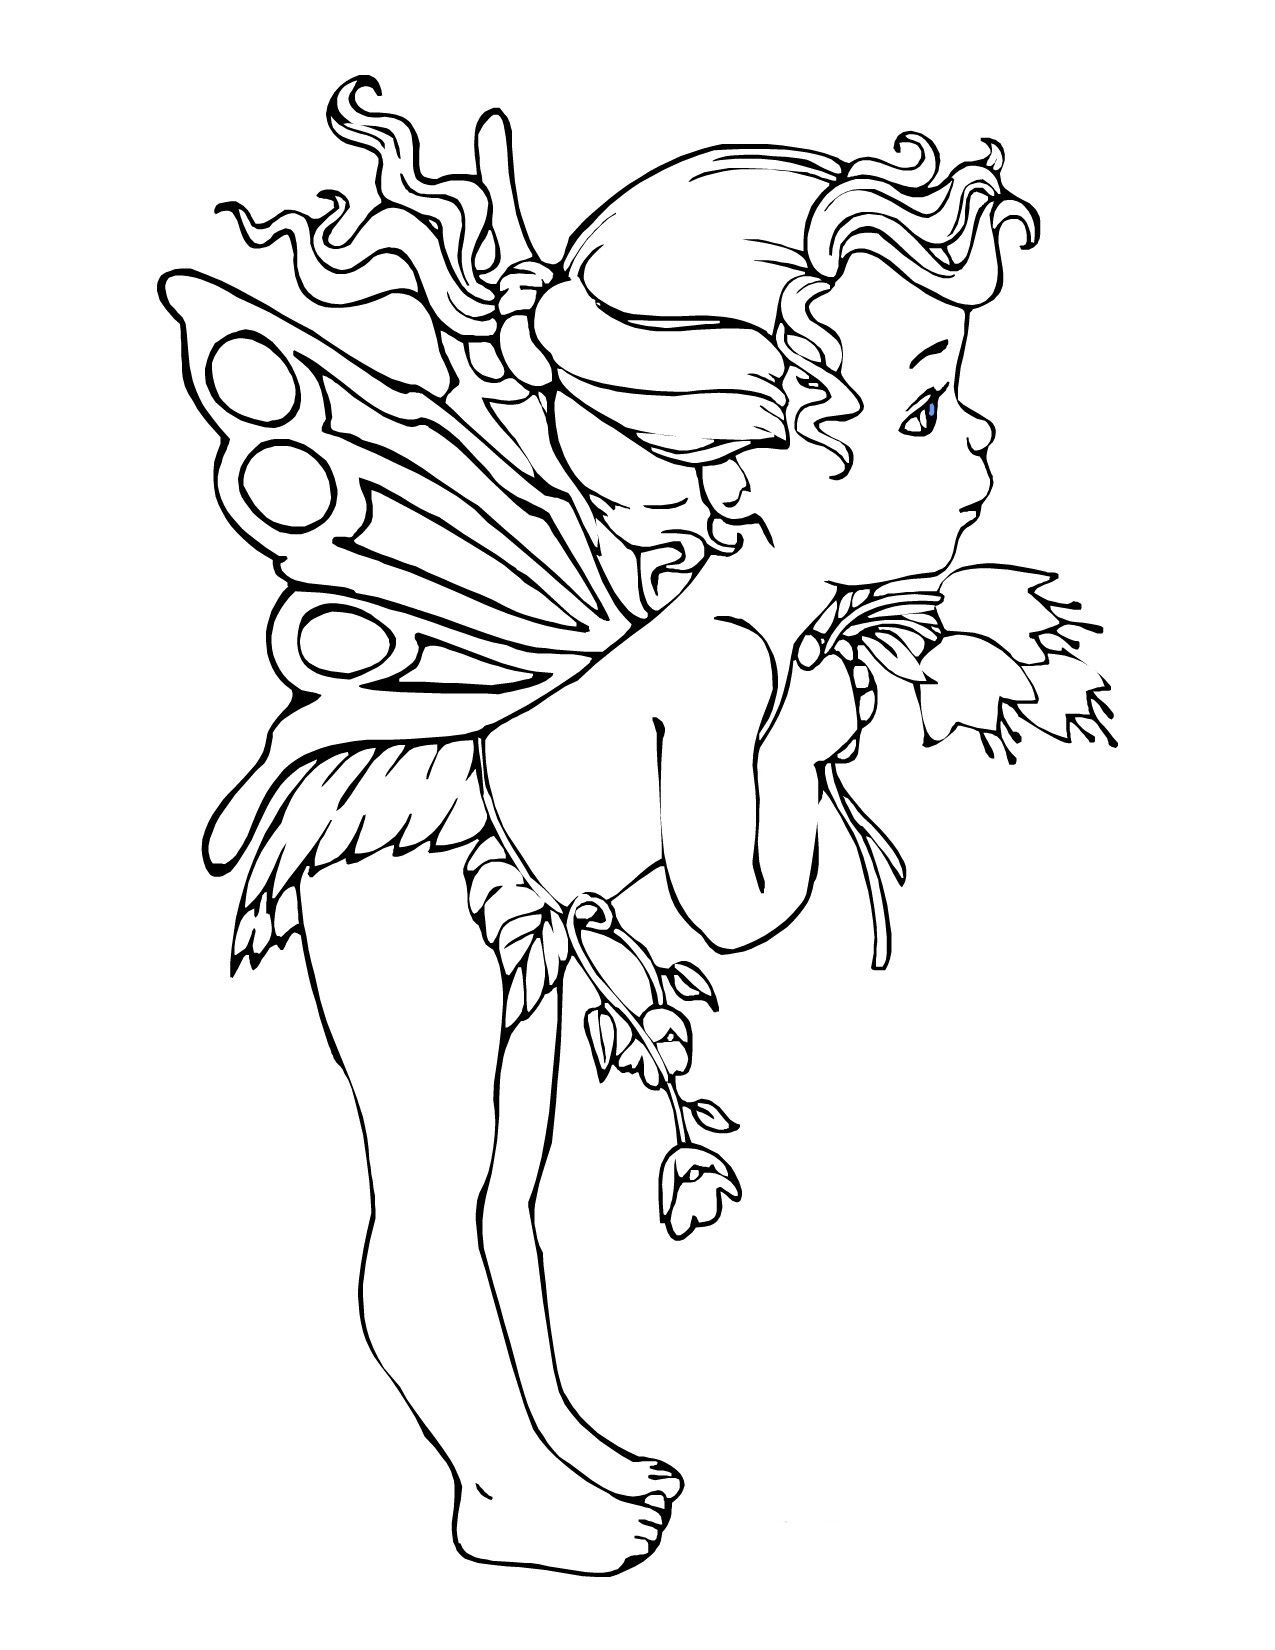 Free Printable Fairy Coloring Pages For Kids | Design | Fairy - Free Printable Fairy Coloring Pictures